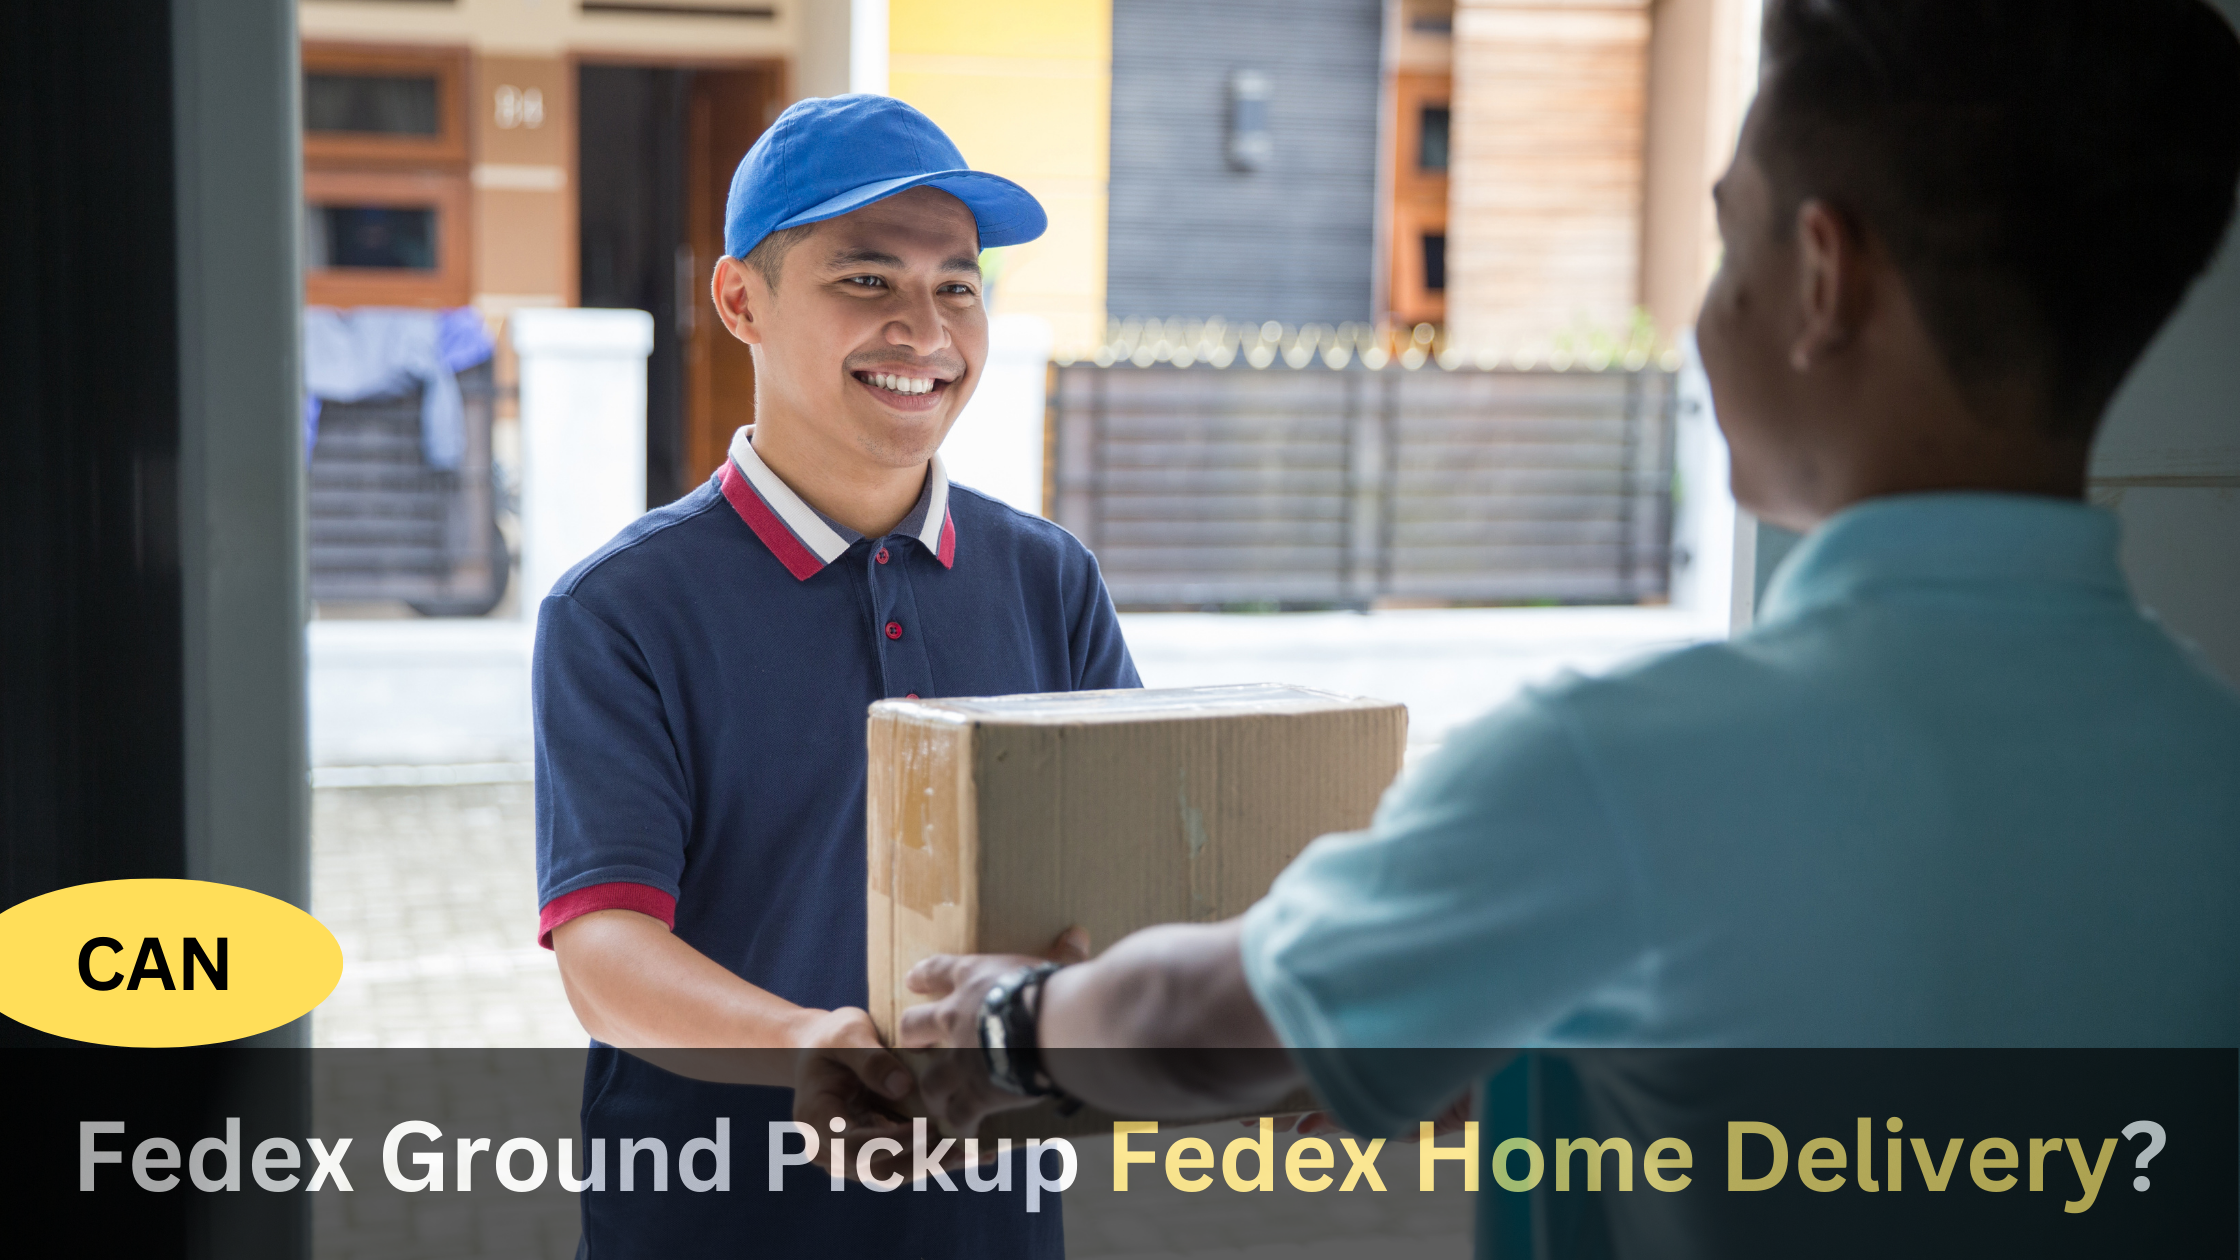 Can Fedex Ground Pickup Fedex Home Delivery - Guide